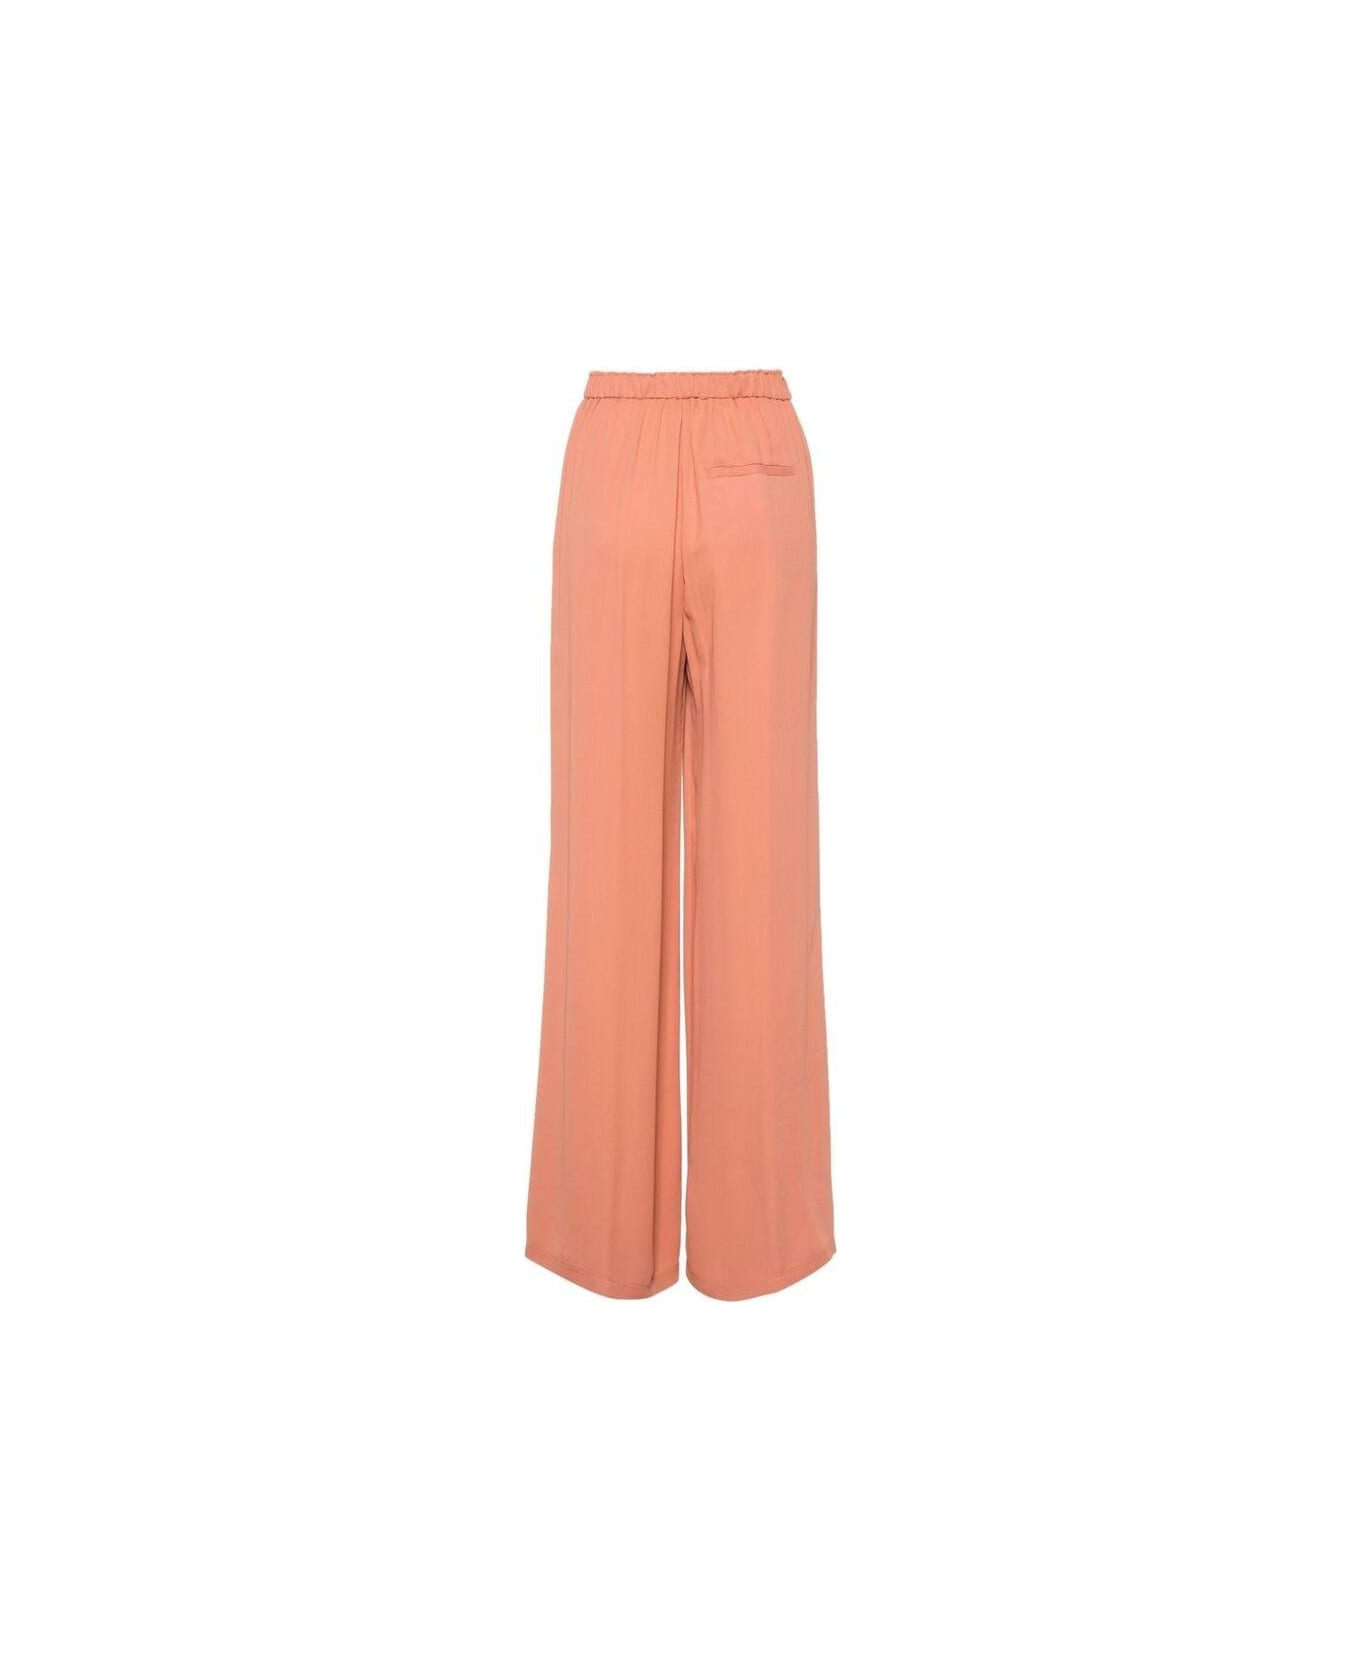 Forte_Forte Stretch Ruched Pants - ORANGE ボトムス